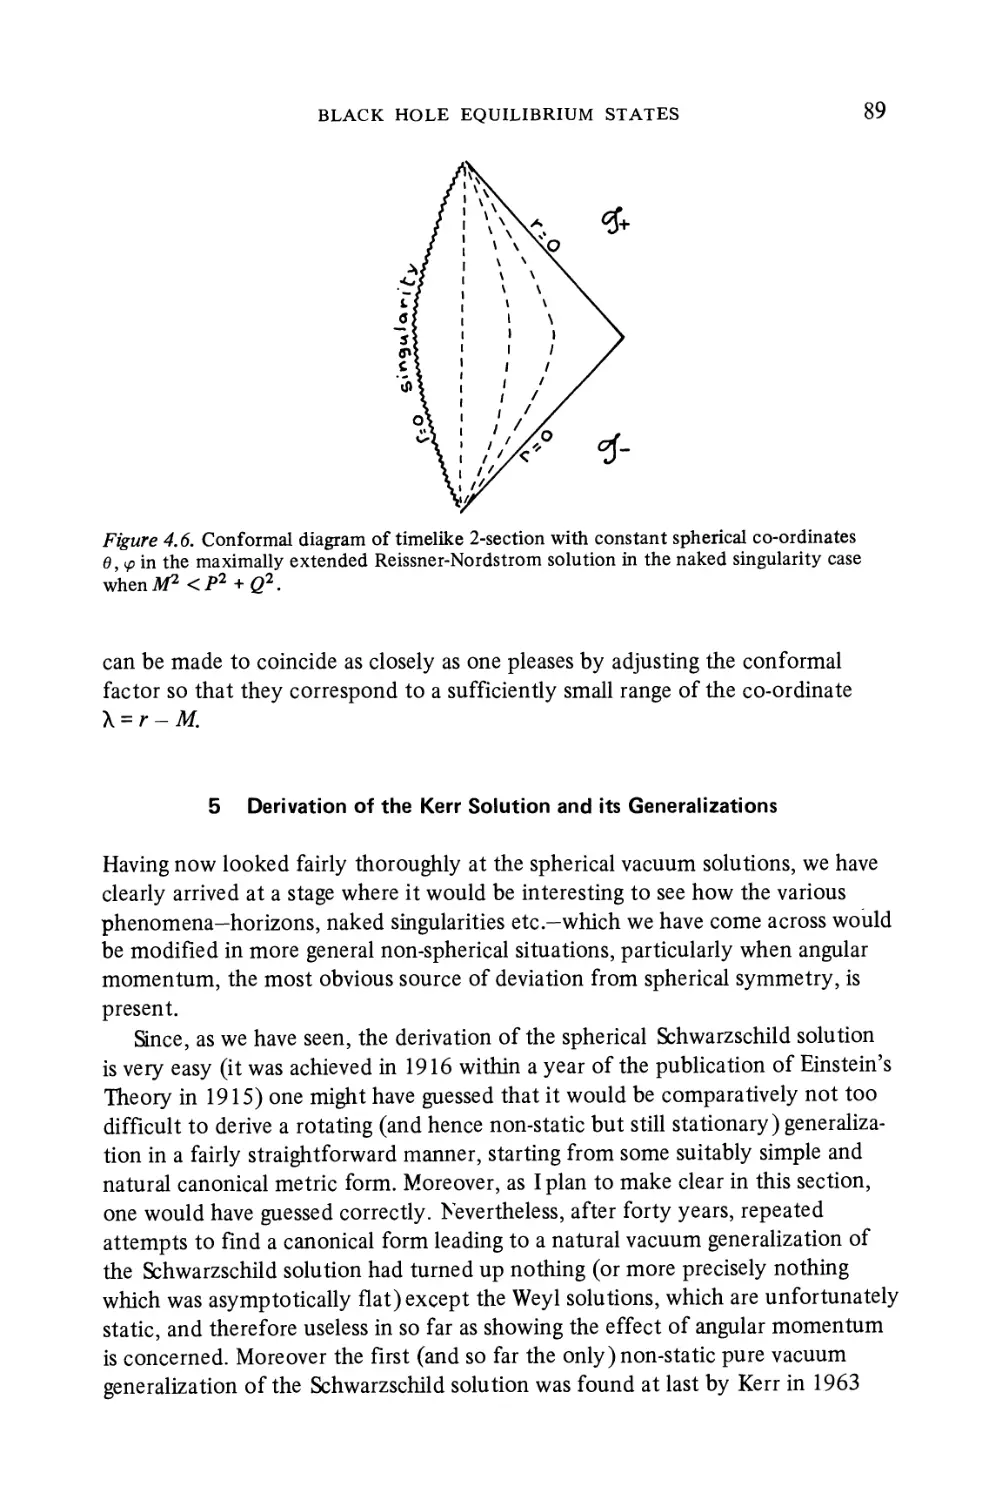 5 Derivation of the Kerr Solution and its Generalizations